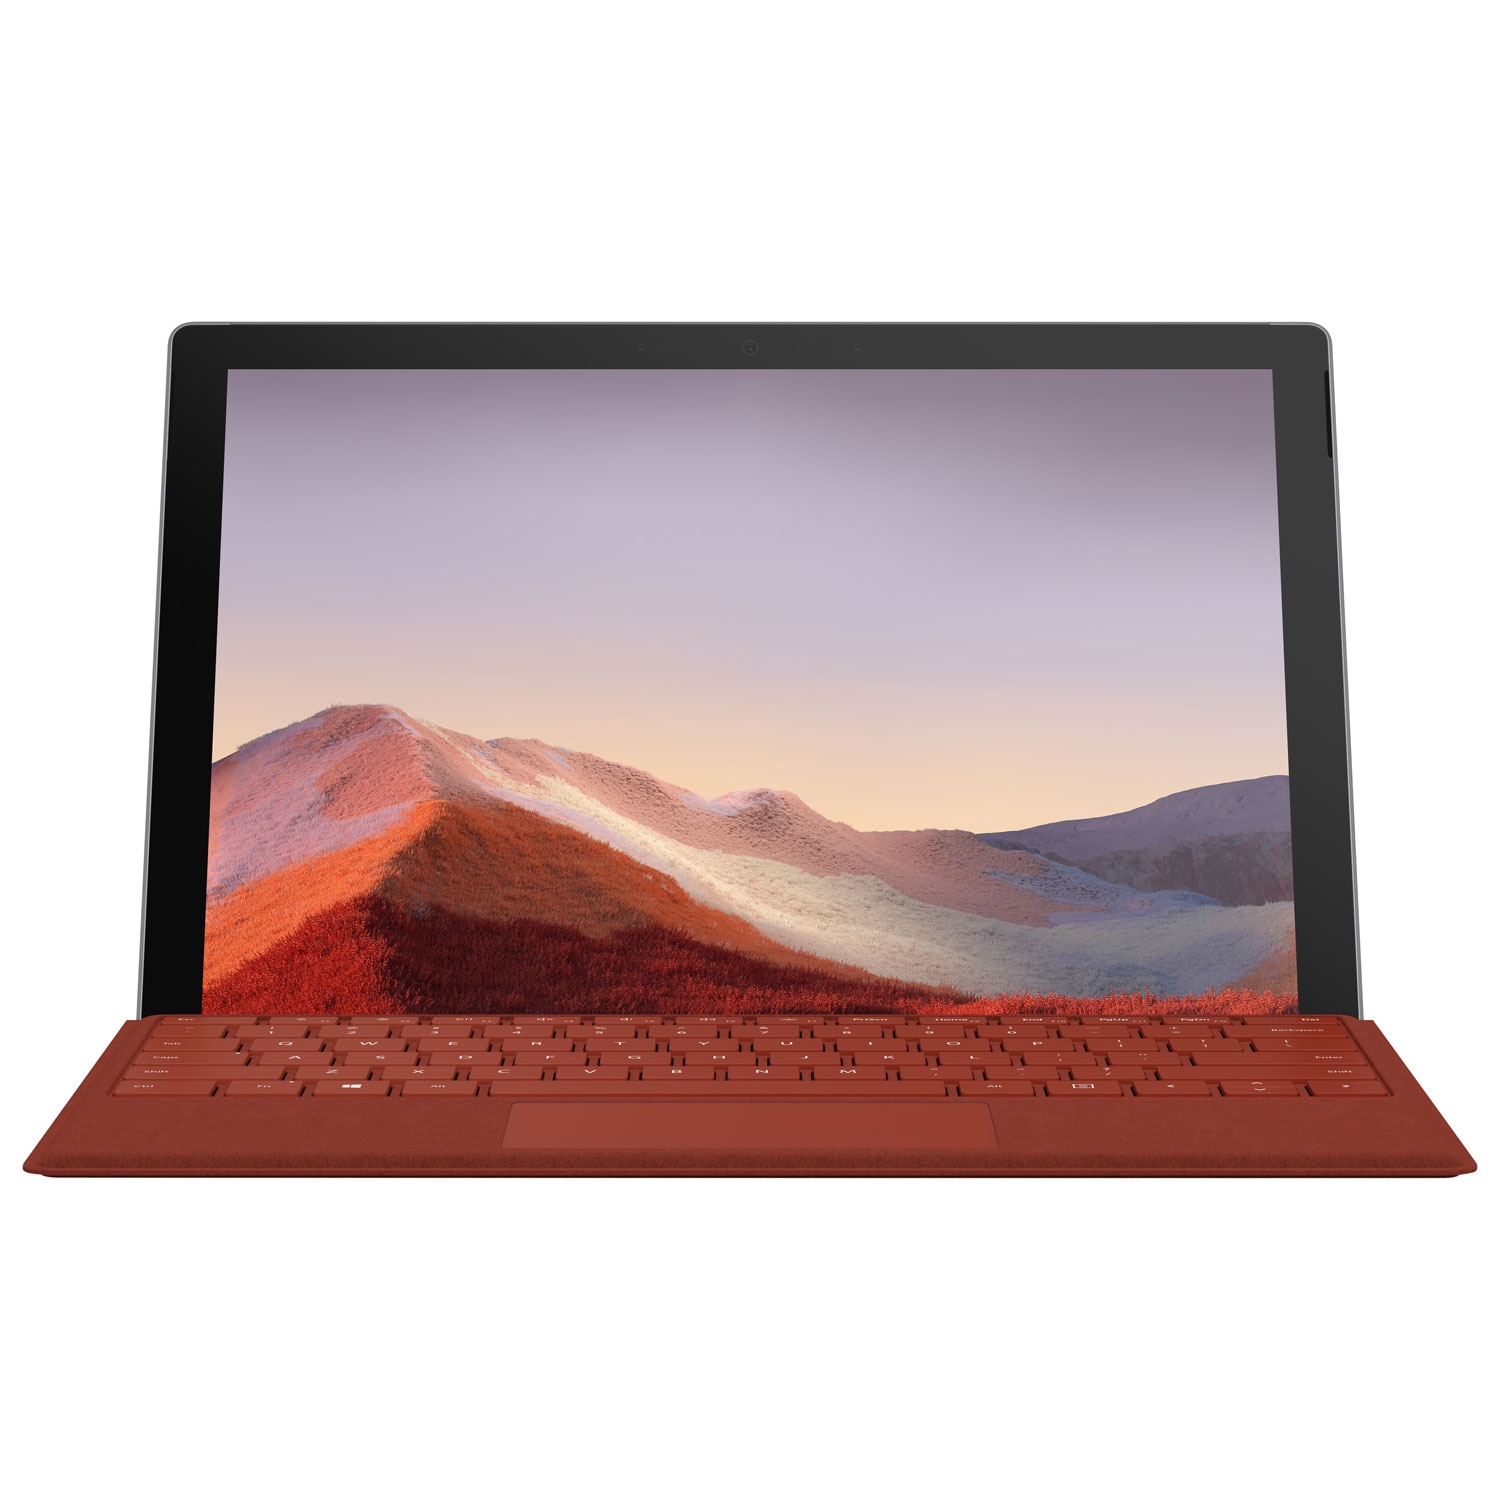 Refurbished (Excellent) - Microsoft Surface Pro 7 12.3" 128GB Windows 10 Tablet With 10th Gen Intel Core i3/4GB RAM - Platinum